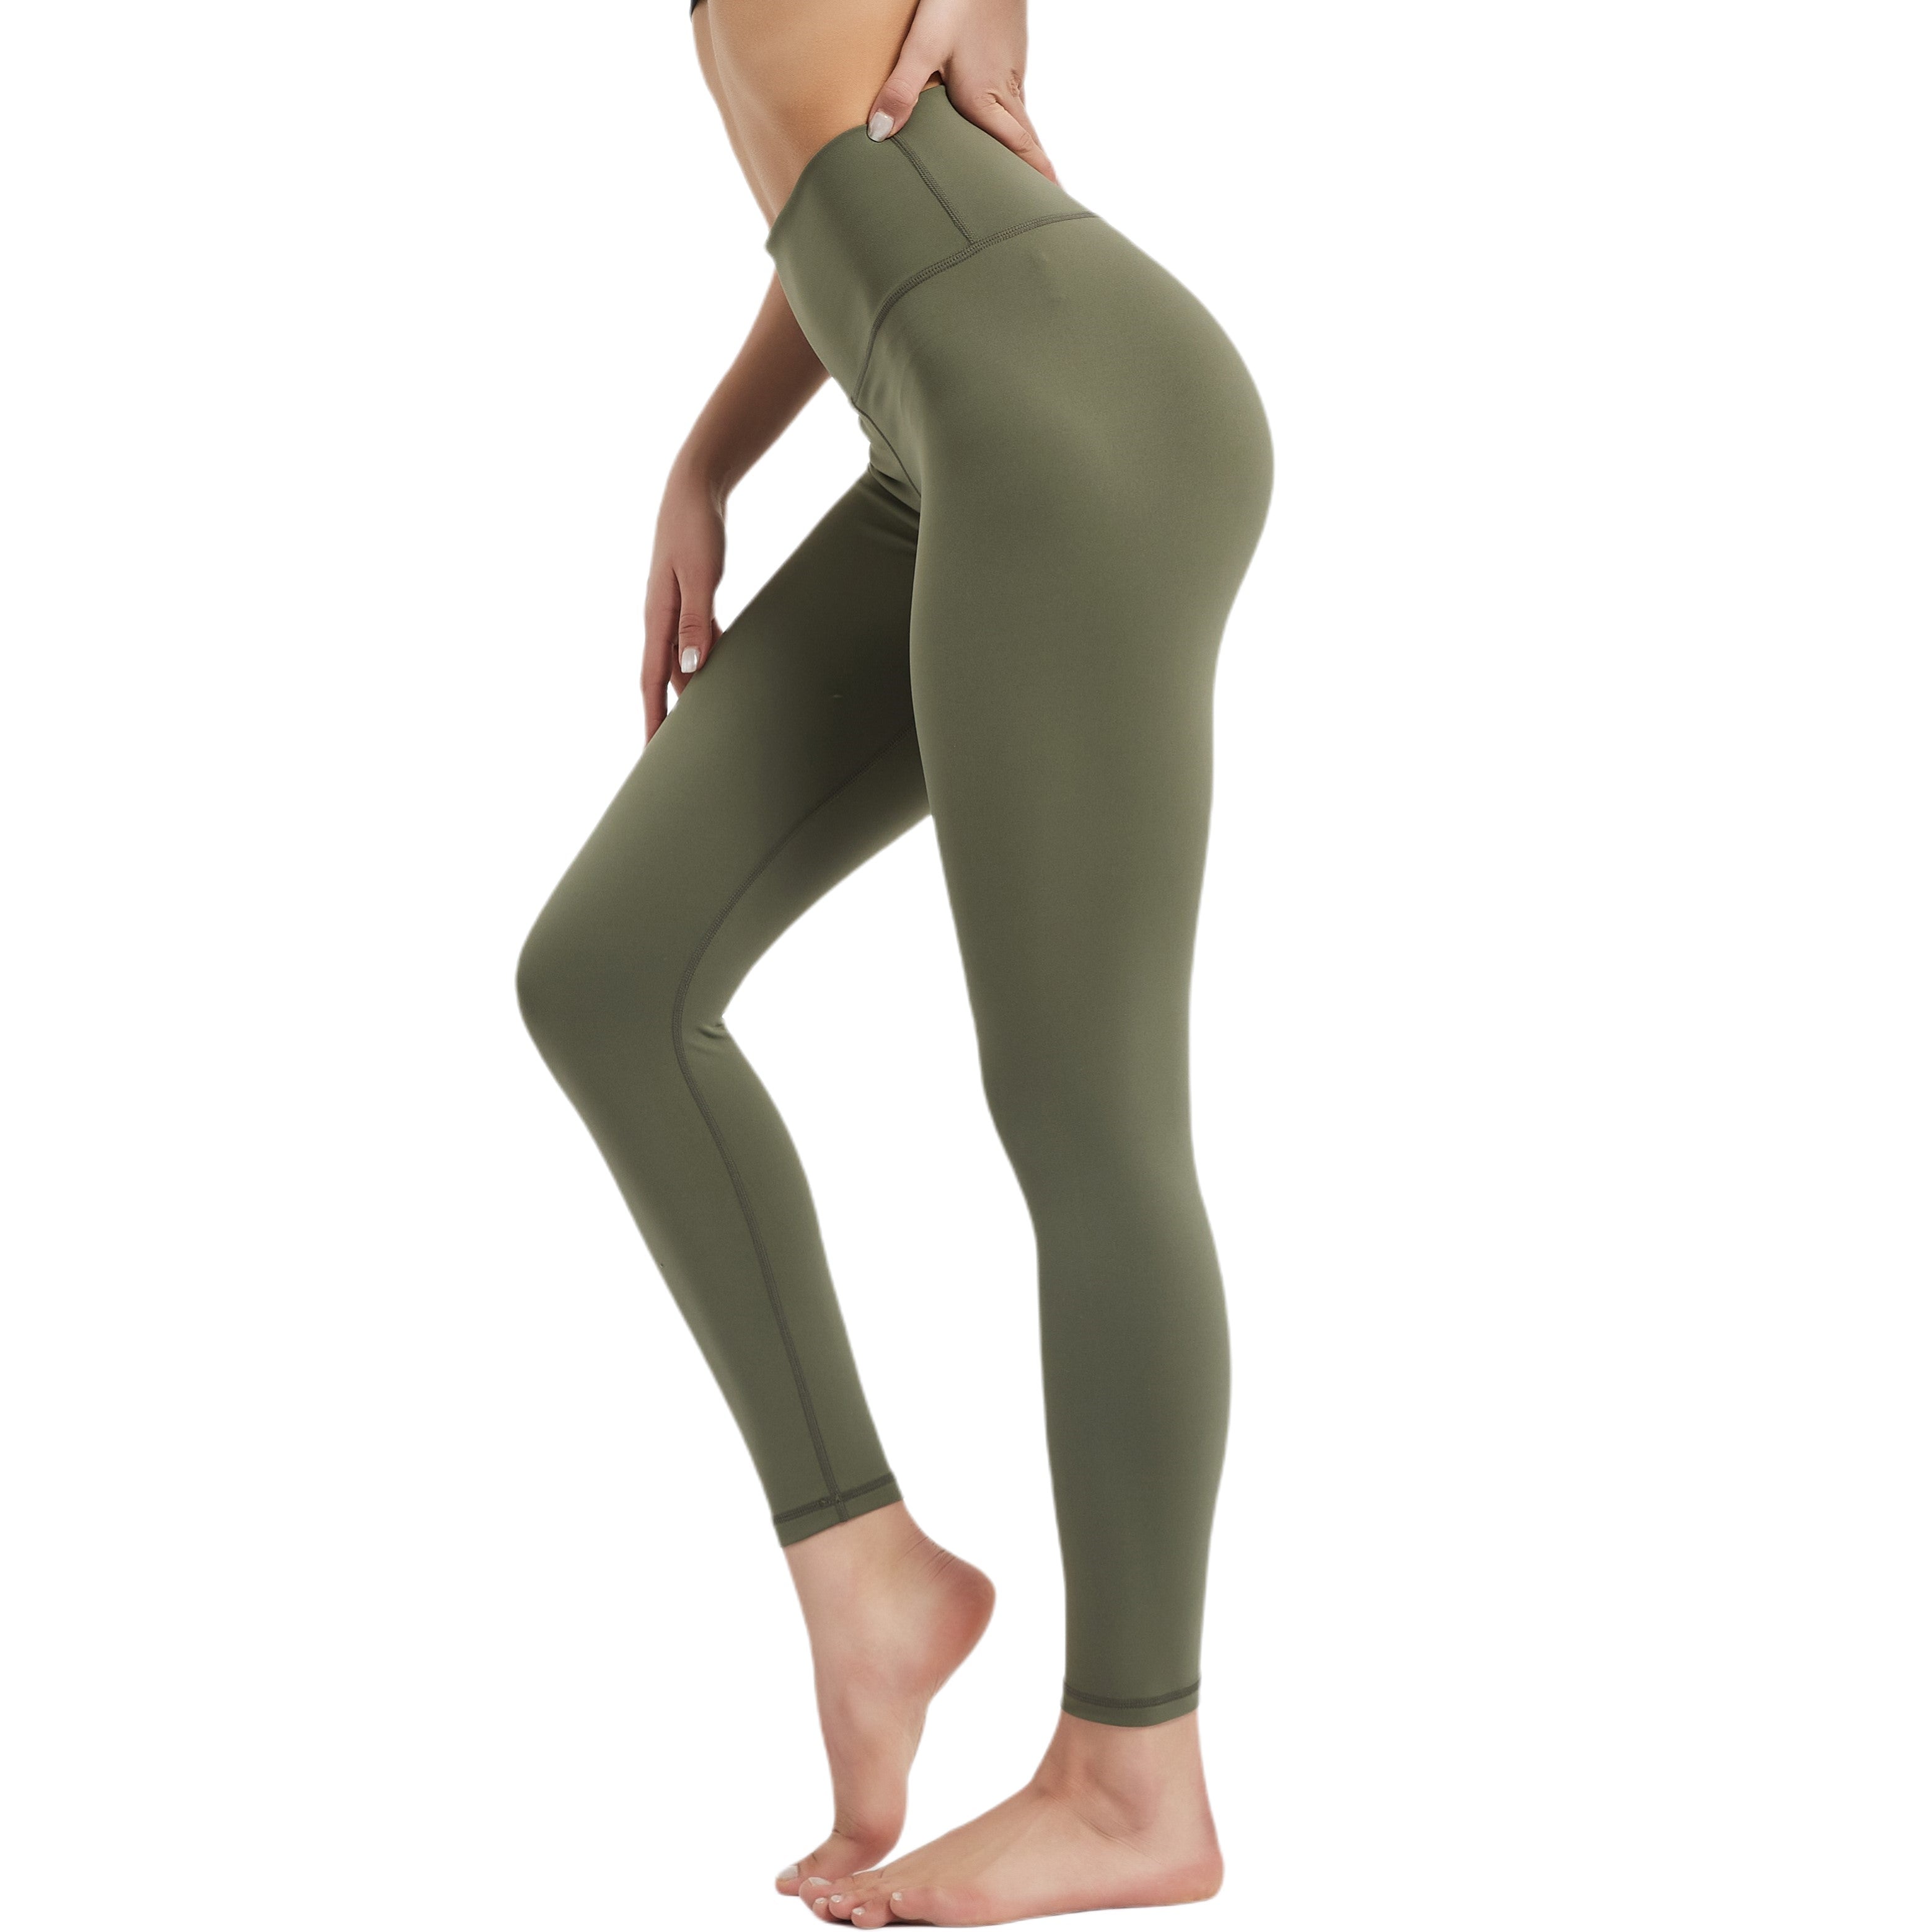 New womens 2 piece workout outfit seamless bra amp leggings szS army  green  eBay